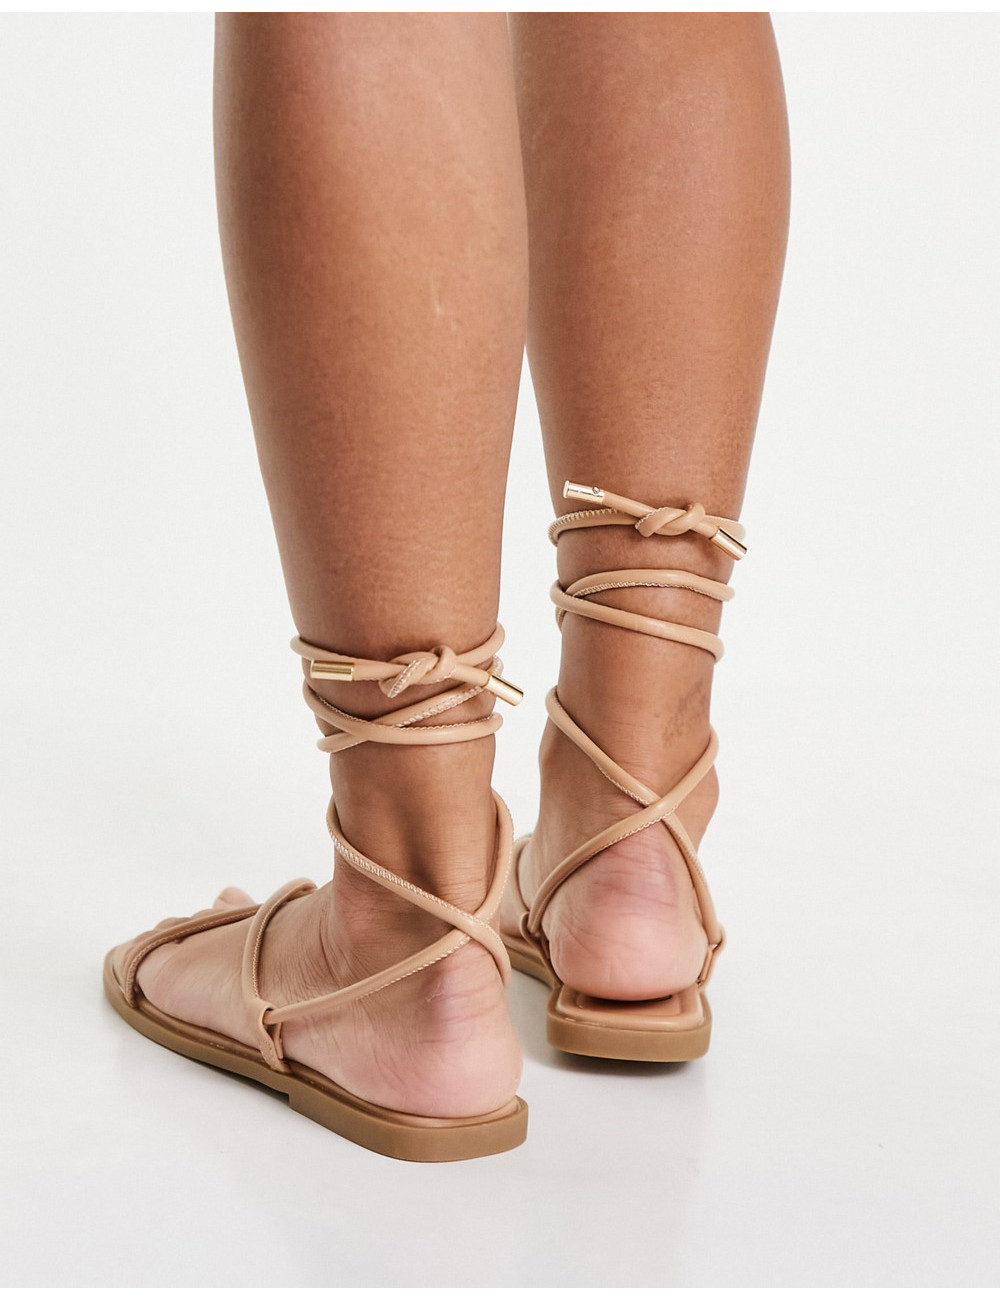 Missguided toe post sandals...